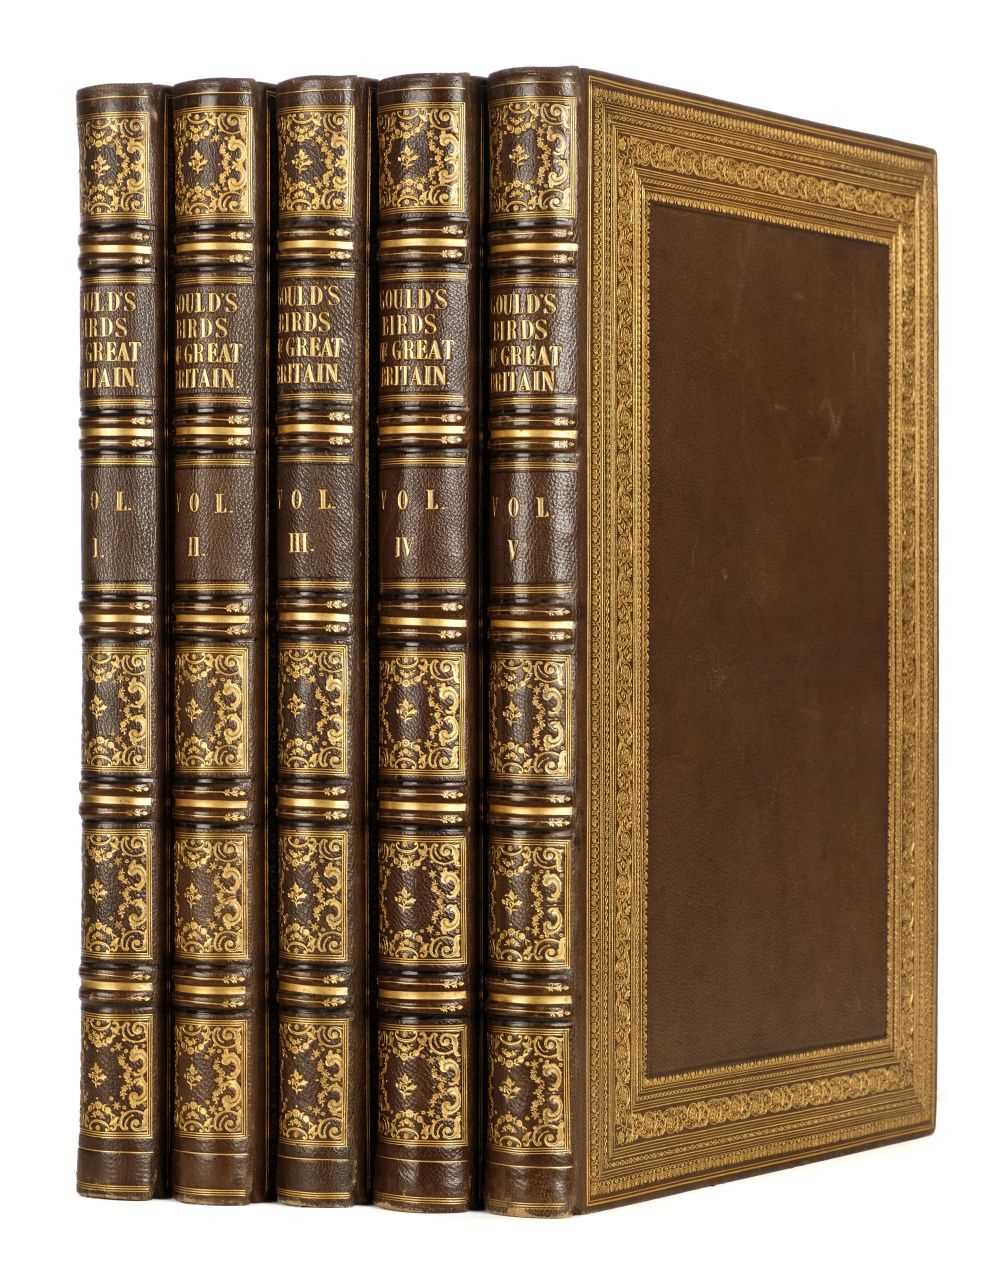 Lot 136 - Gould (John). The Birds of Great Britain, 5 volumes, 1st edition, 1862-73